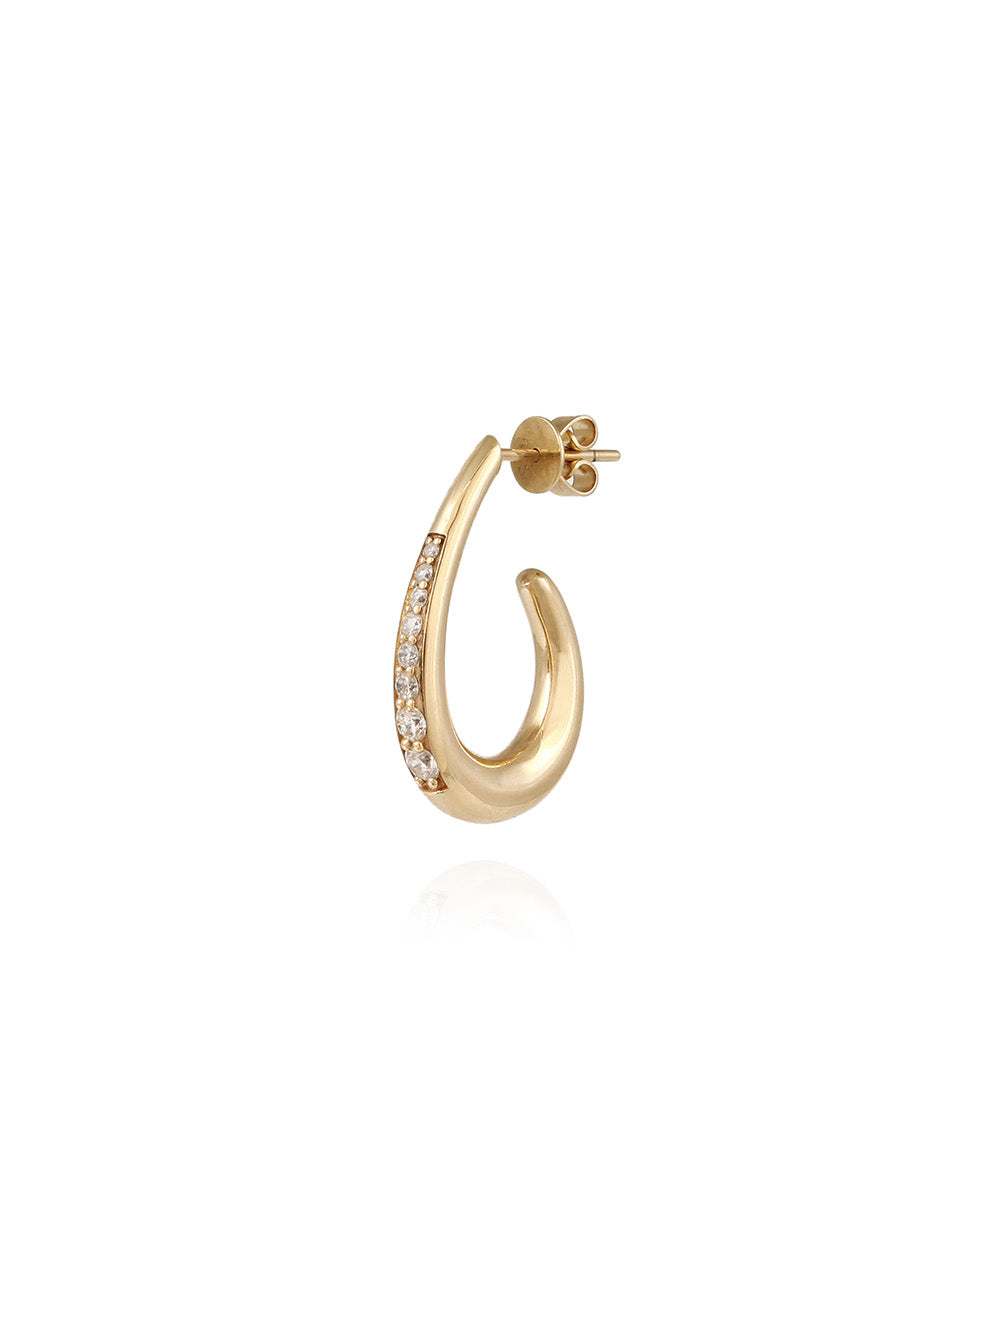 WIDE-CUT OPEN OVAL EARRING PAVE WITH DIAMONDS 